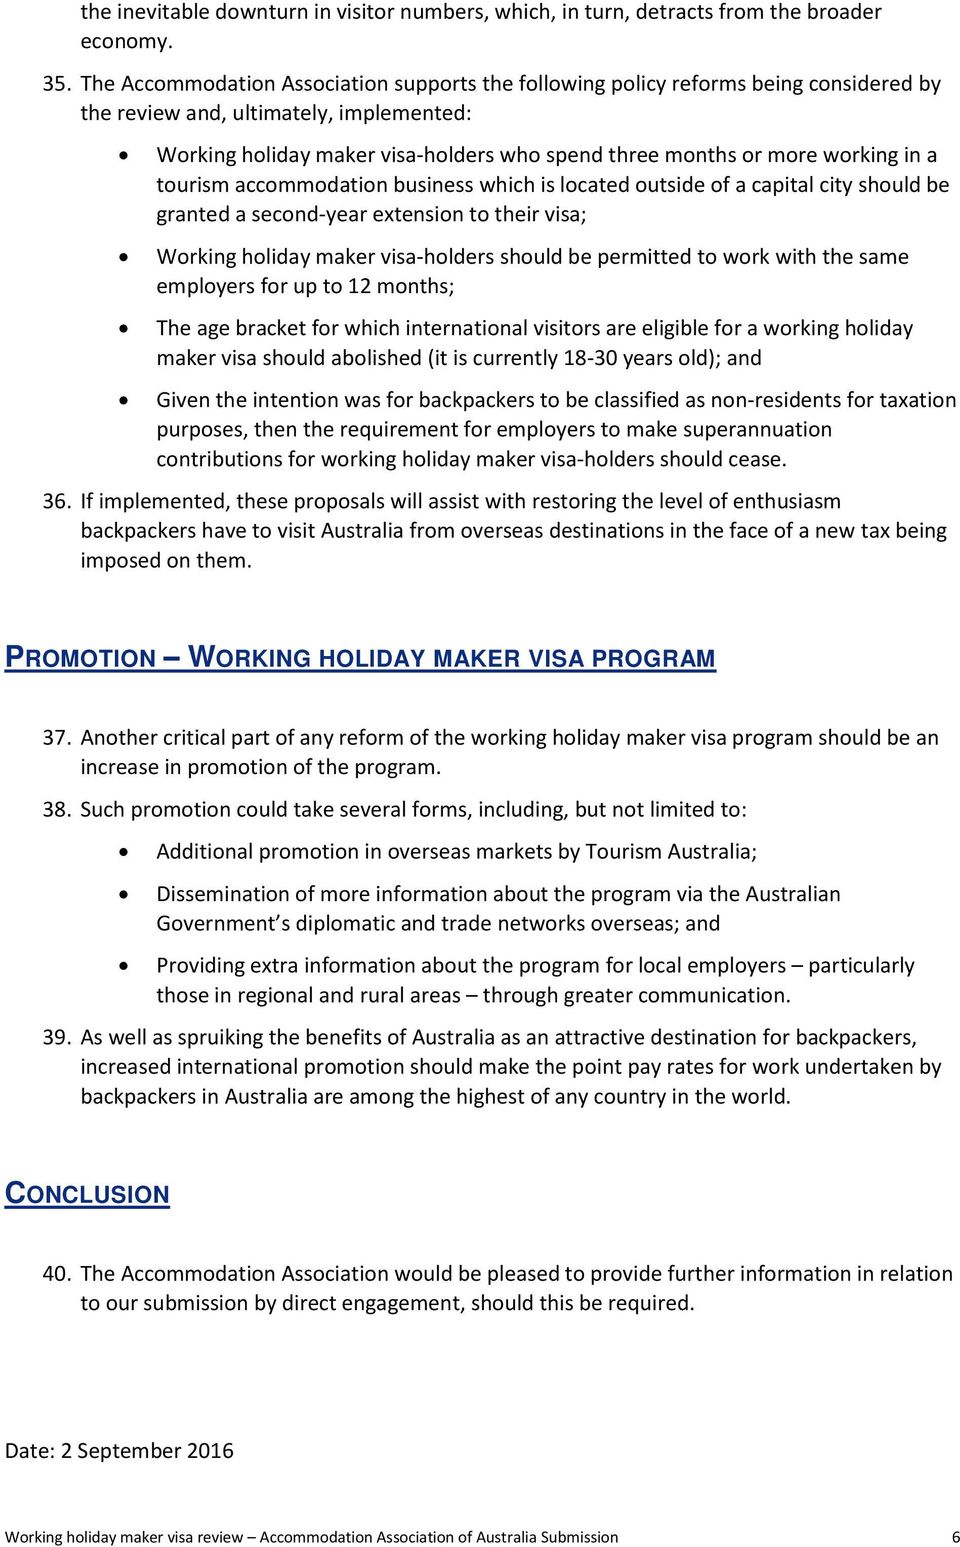 working in a tourism accommodation business which is located outside of a capital city should be granted a second-year extension to their visa; Working holiday maker visa-holders should be permitted